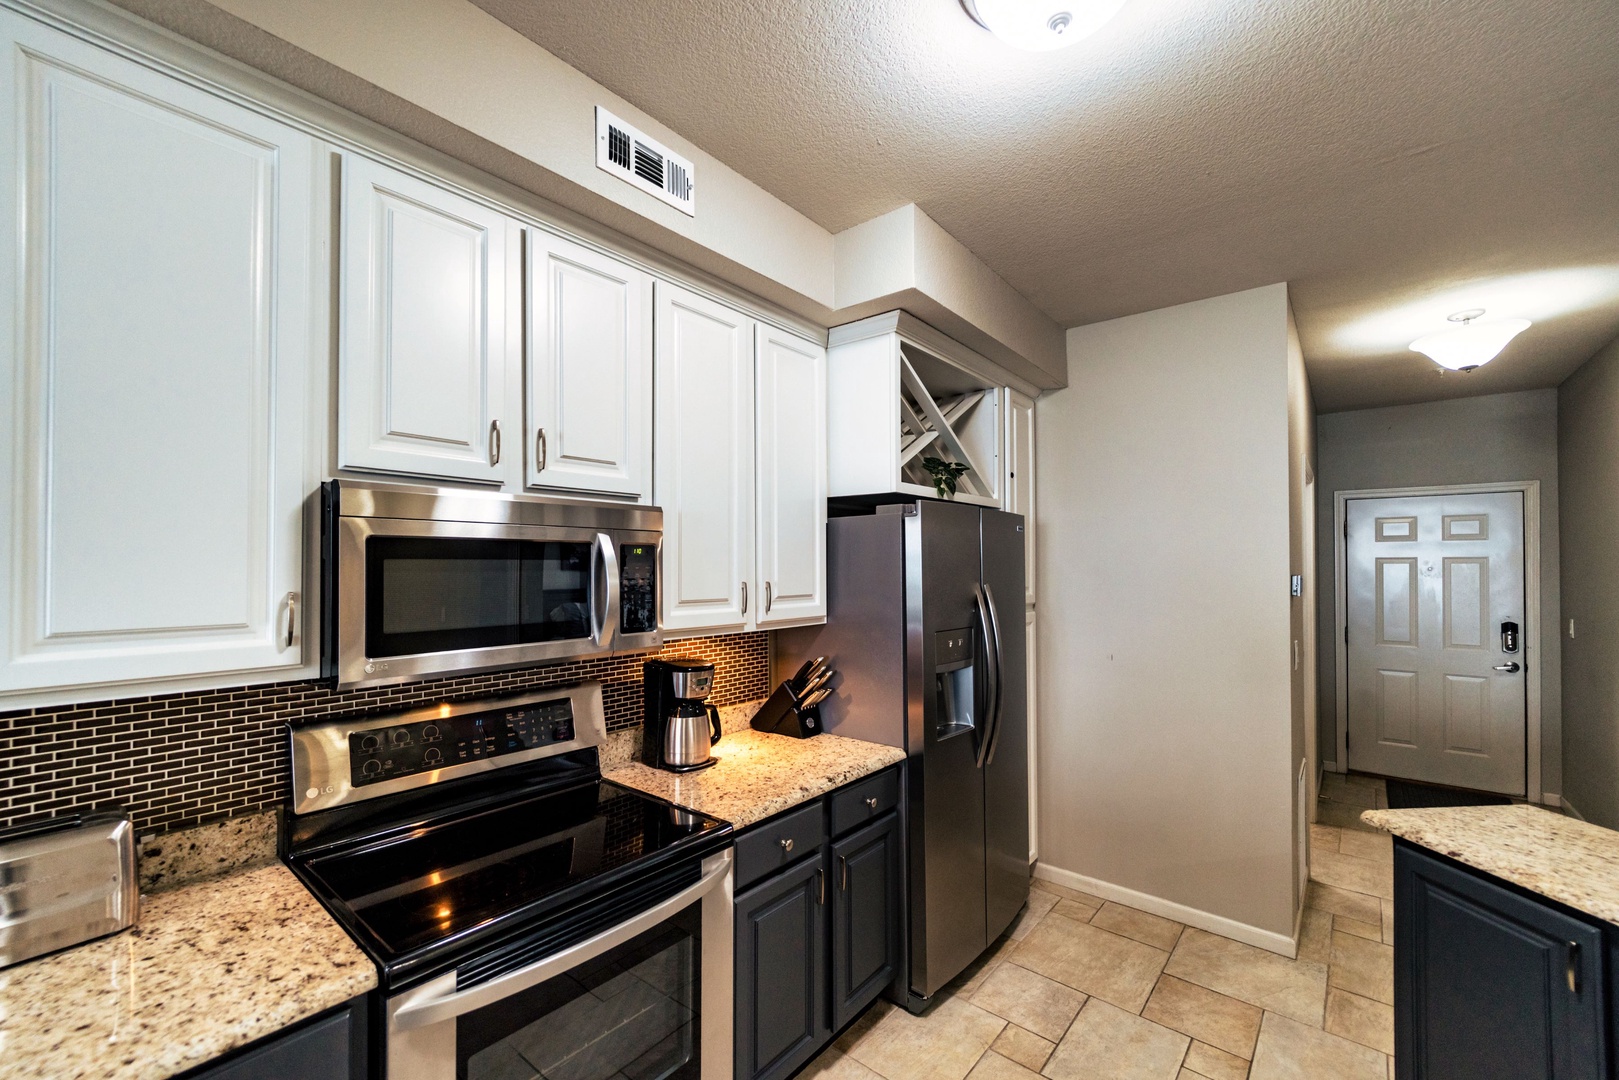 The airy, open kitchen offers ample storage & all the comforts of home